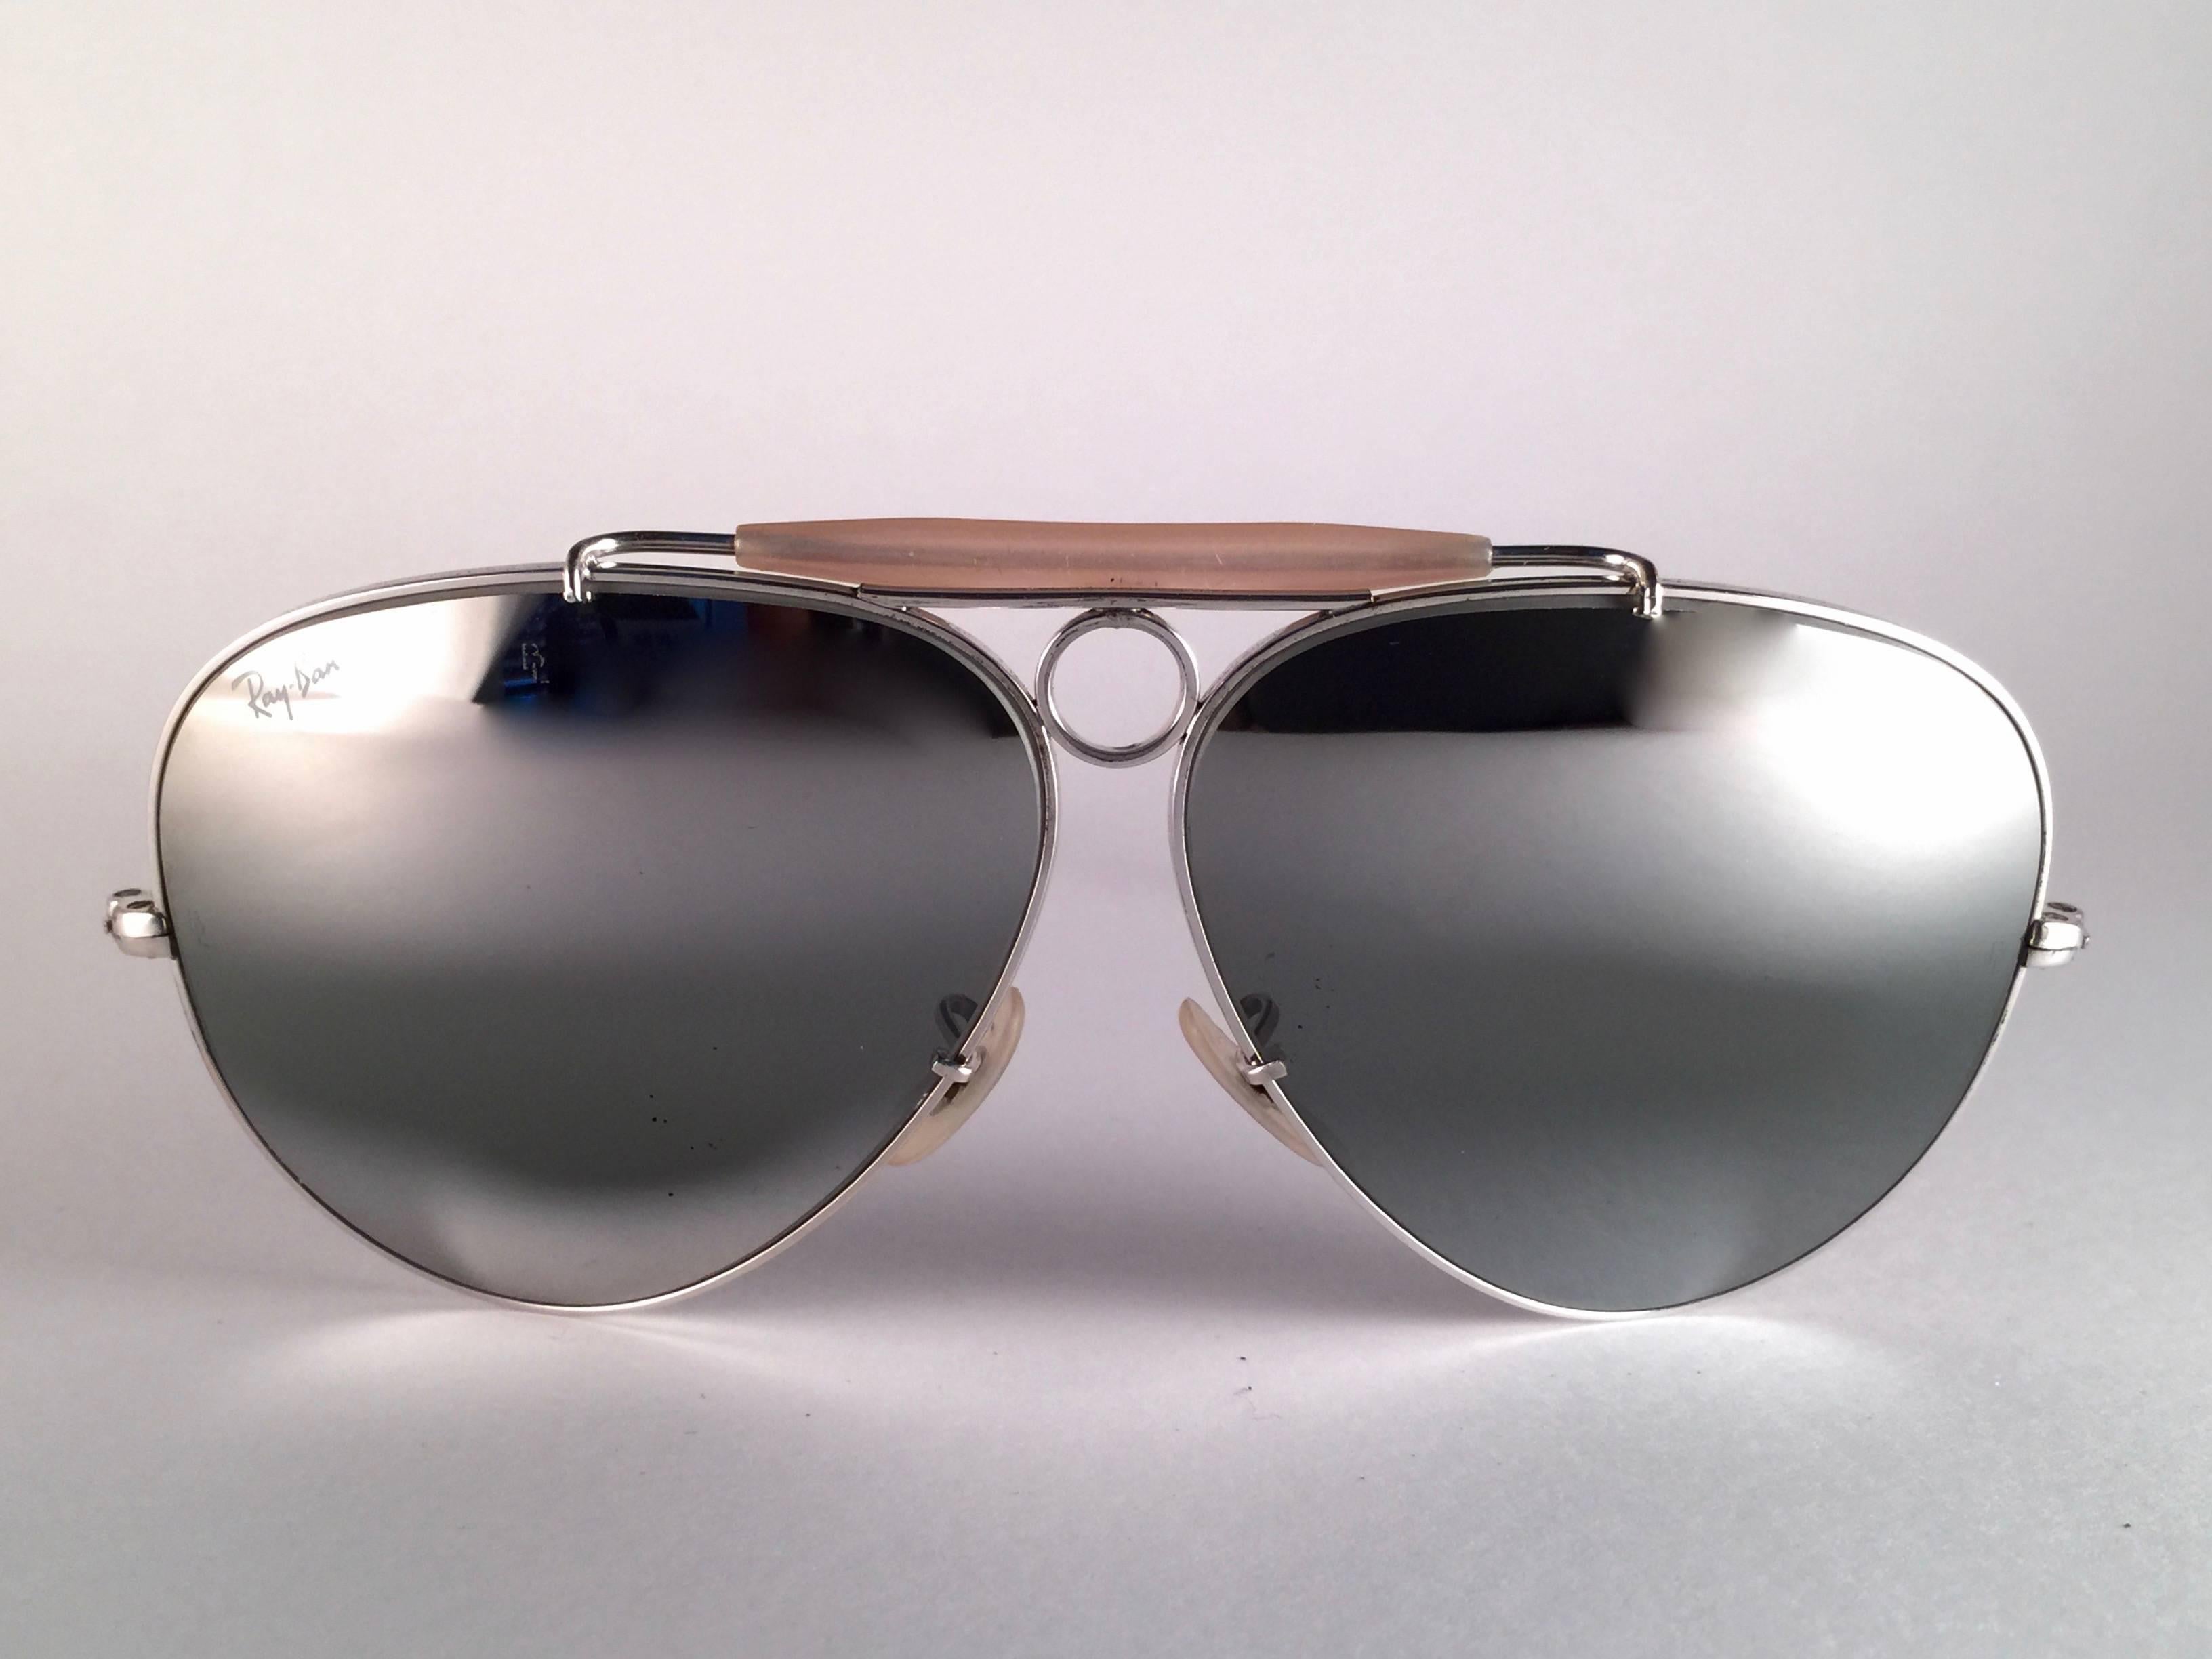 New Vintage Ray Ban Shooter White Gold 62mm with double mirror lenses.  B&L etched twice in both lenses.  
Comes with its original Ray Ban B&L case.  
A seldom piece in new, never worn or displayed condition.